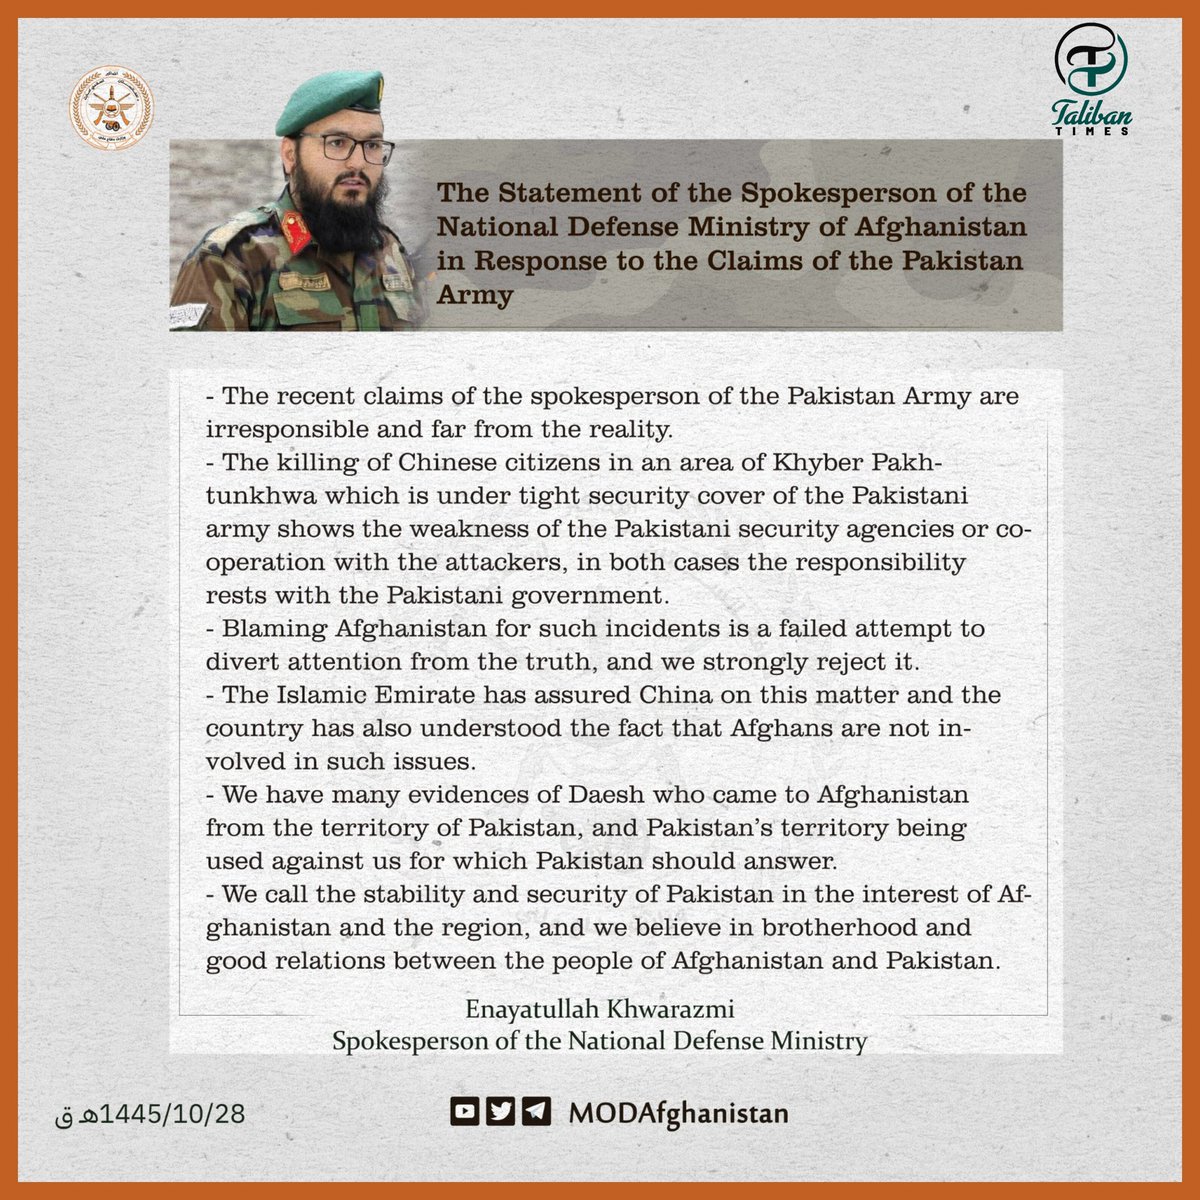 Statement of the Spokesperson of the National Defense Ministry of Afghanistan in Response to the Claims of the Pakistan Army.
#Afghanistan #Taliban_times